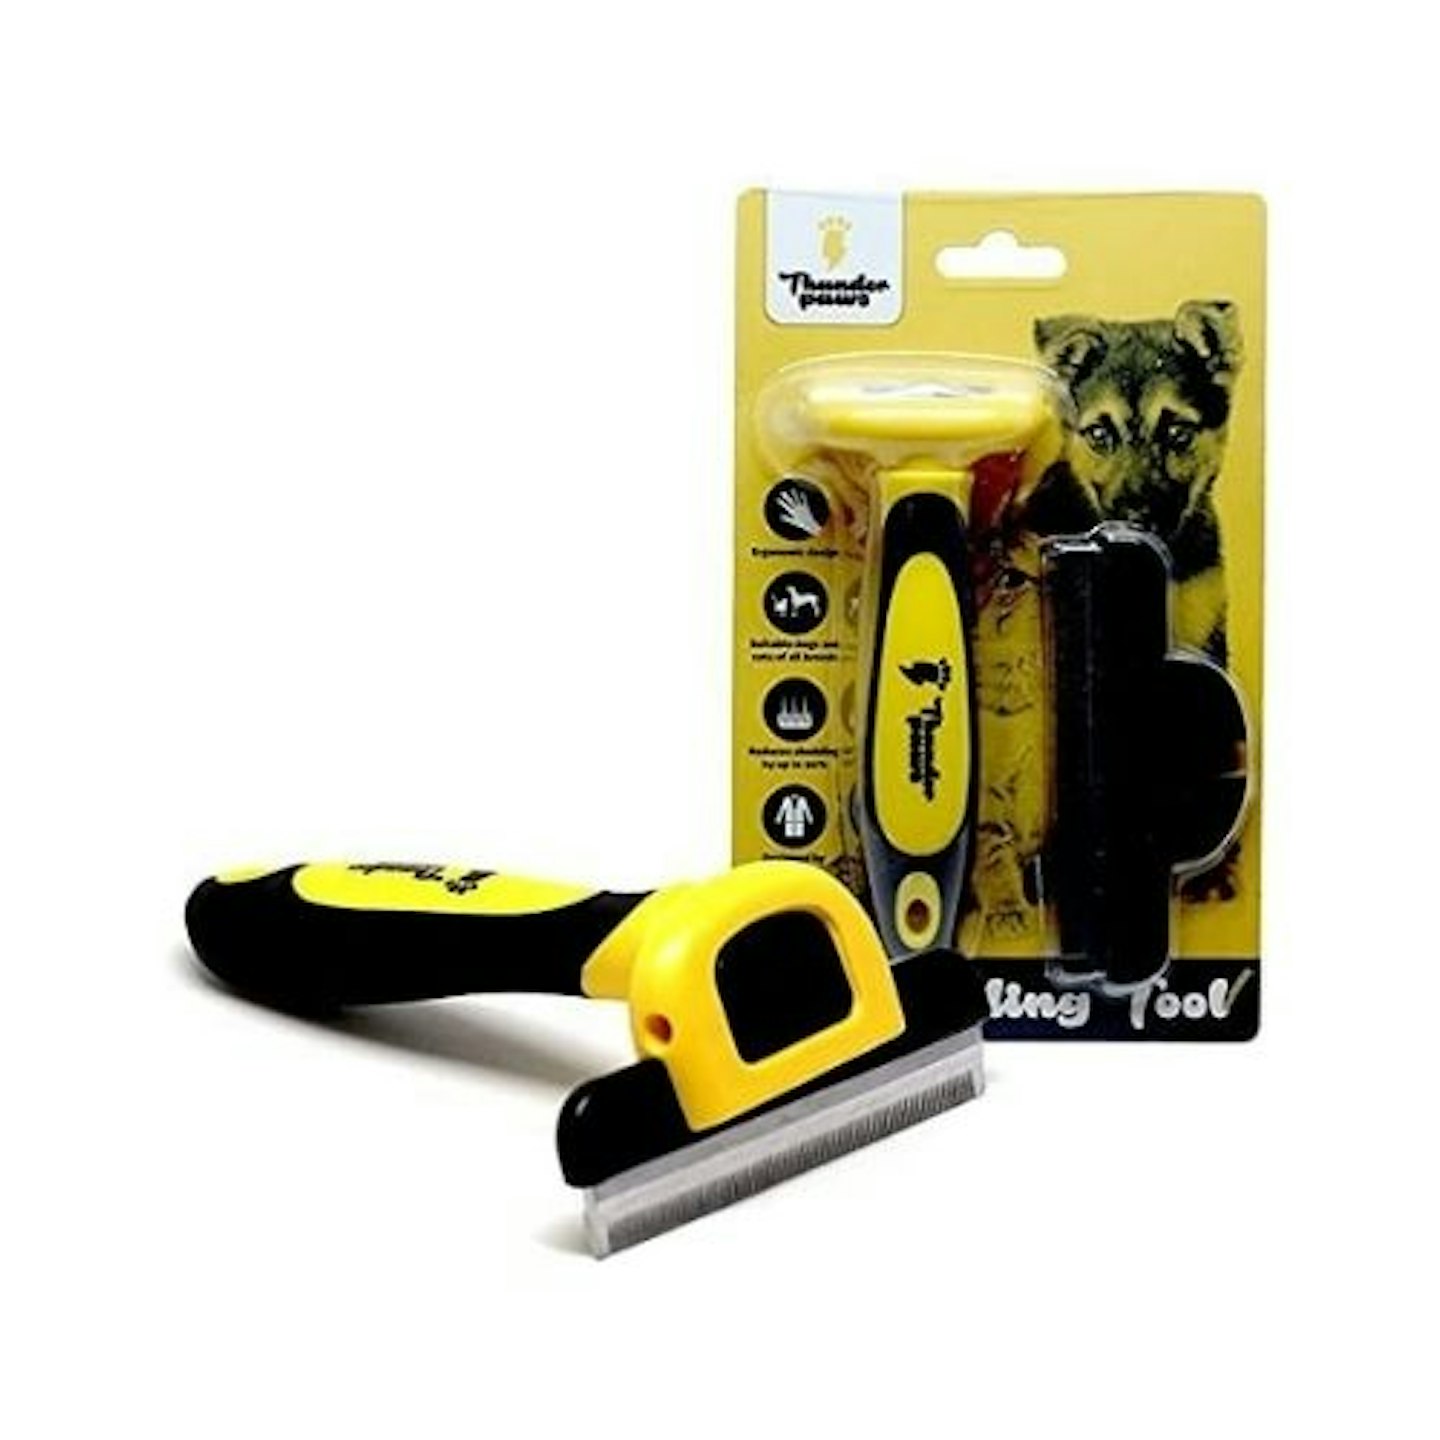 Thunderpaws Best Professional Deshedding Tool and Pet Grooming Brush